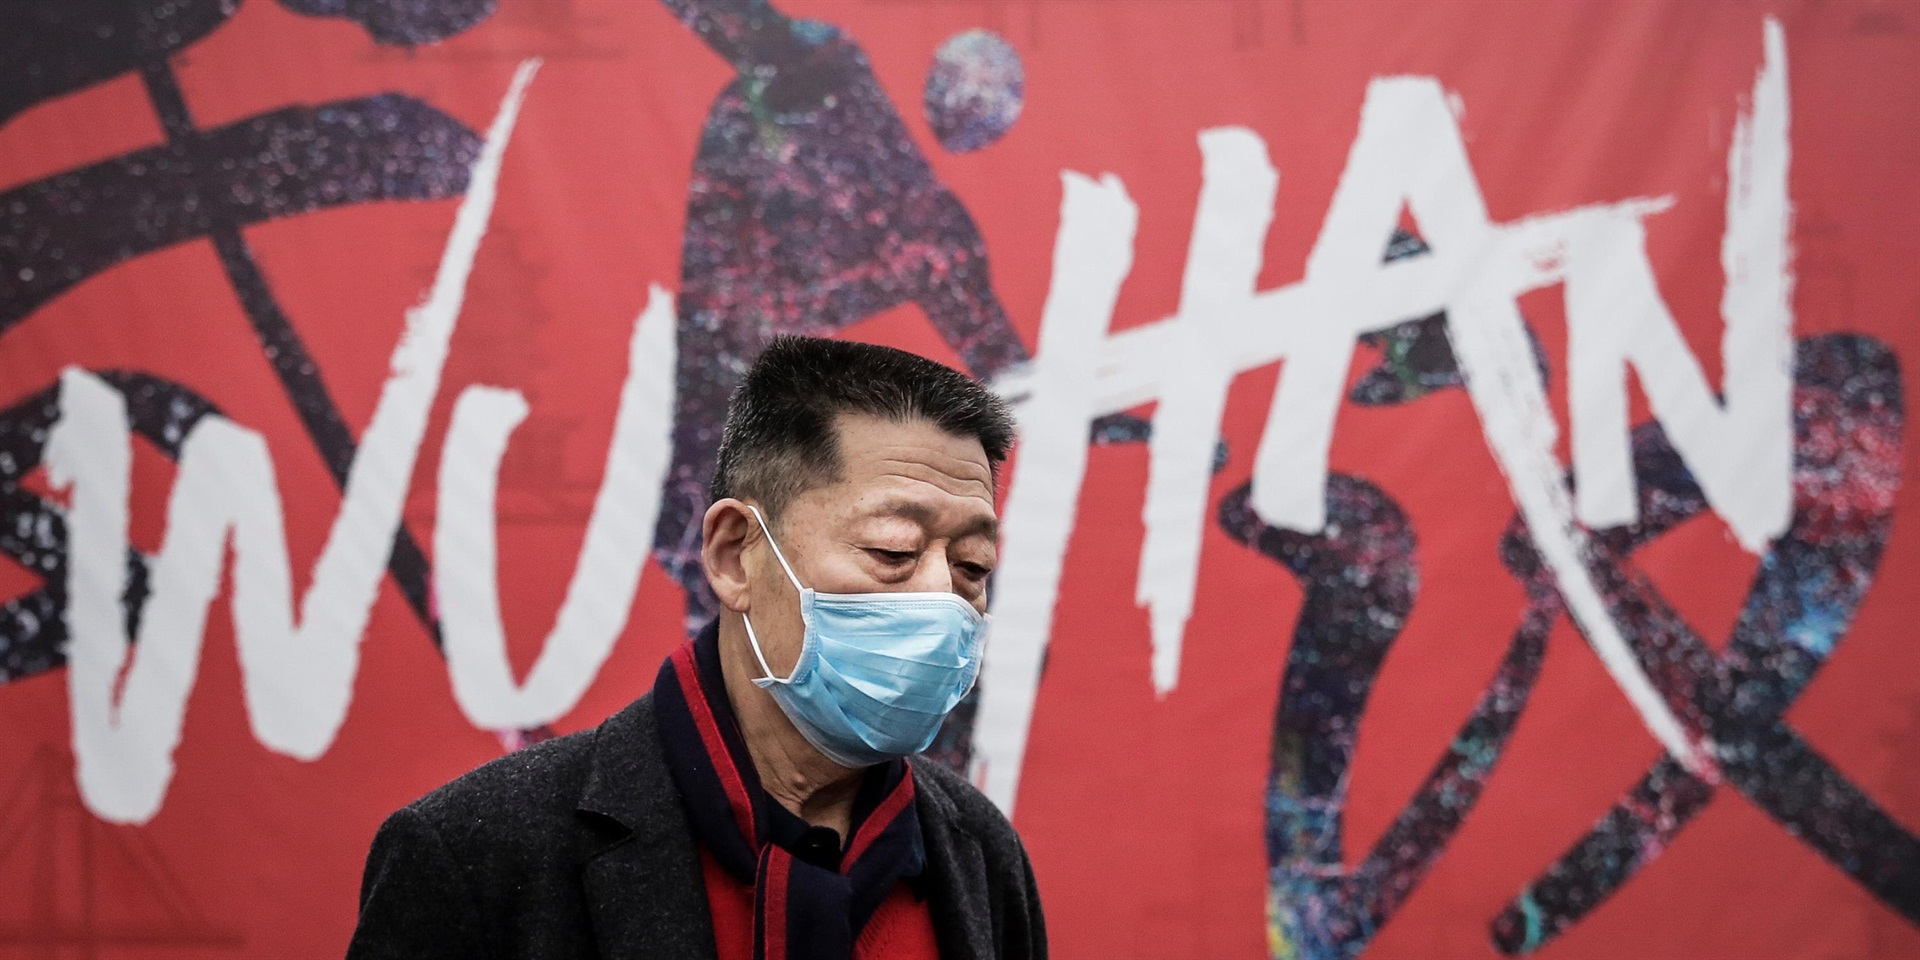 A man wears a mask while walking in the street in Wuhan, Hubei province, China. Picture: Supplied/Getty Images